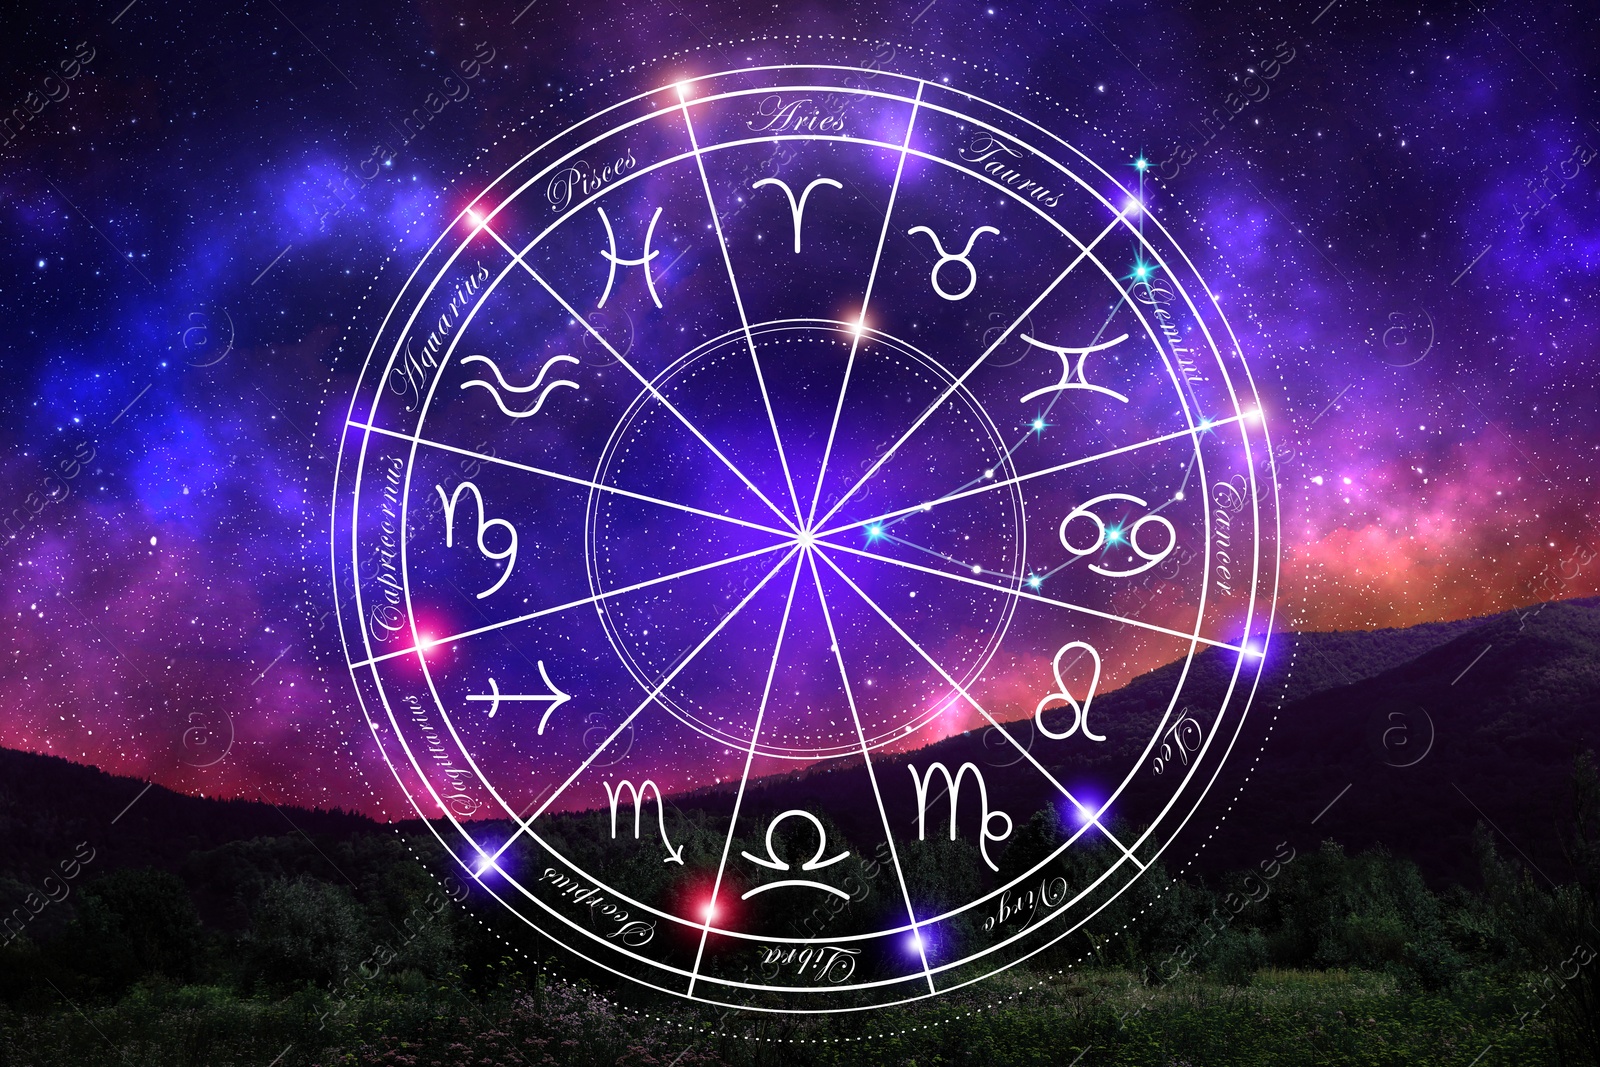 Image of Zodiac wheel showing 12 signs against mountain landscape